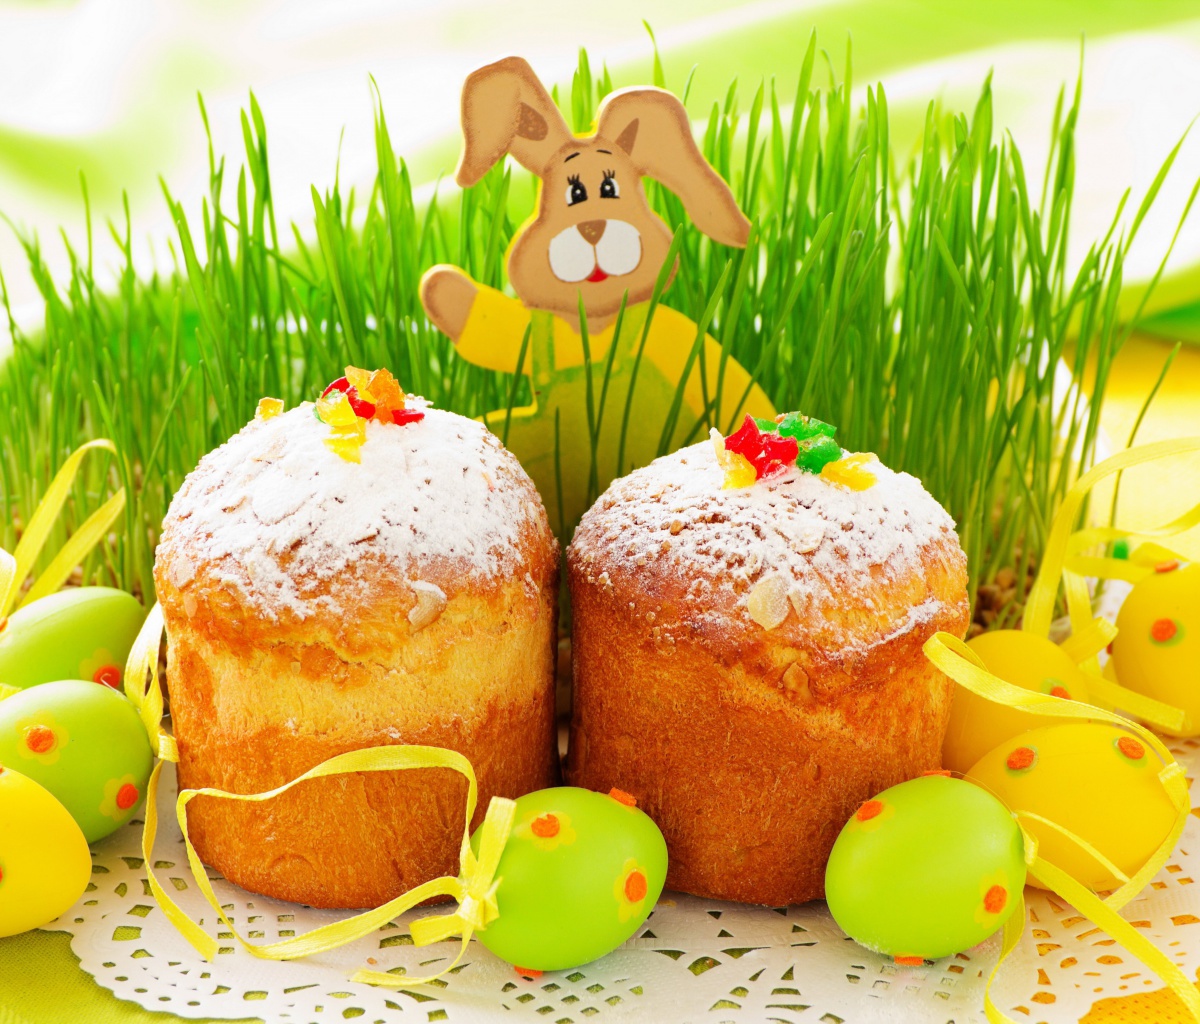 Easter Wish and Eggs wallpaper 1200x1024